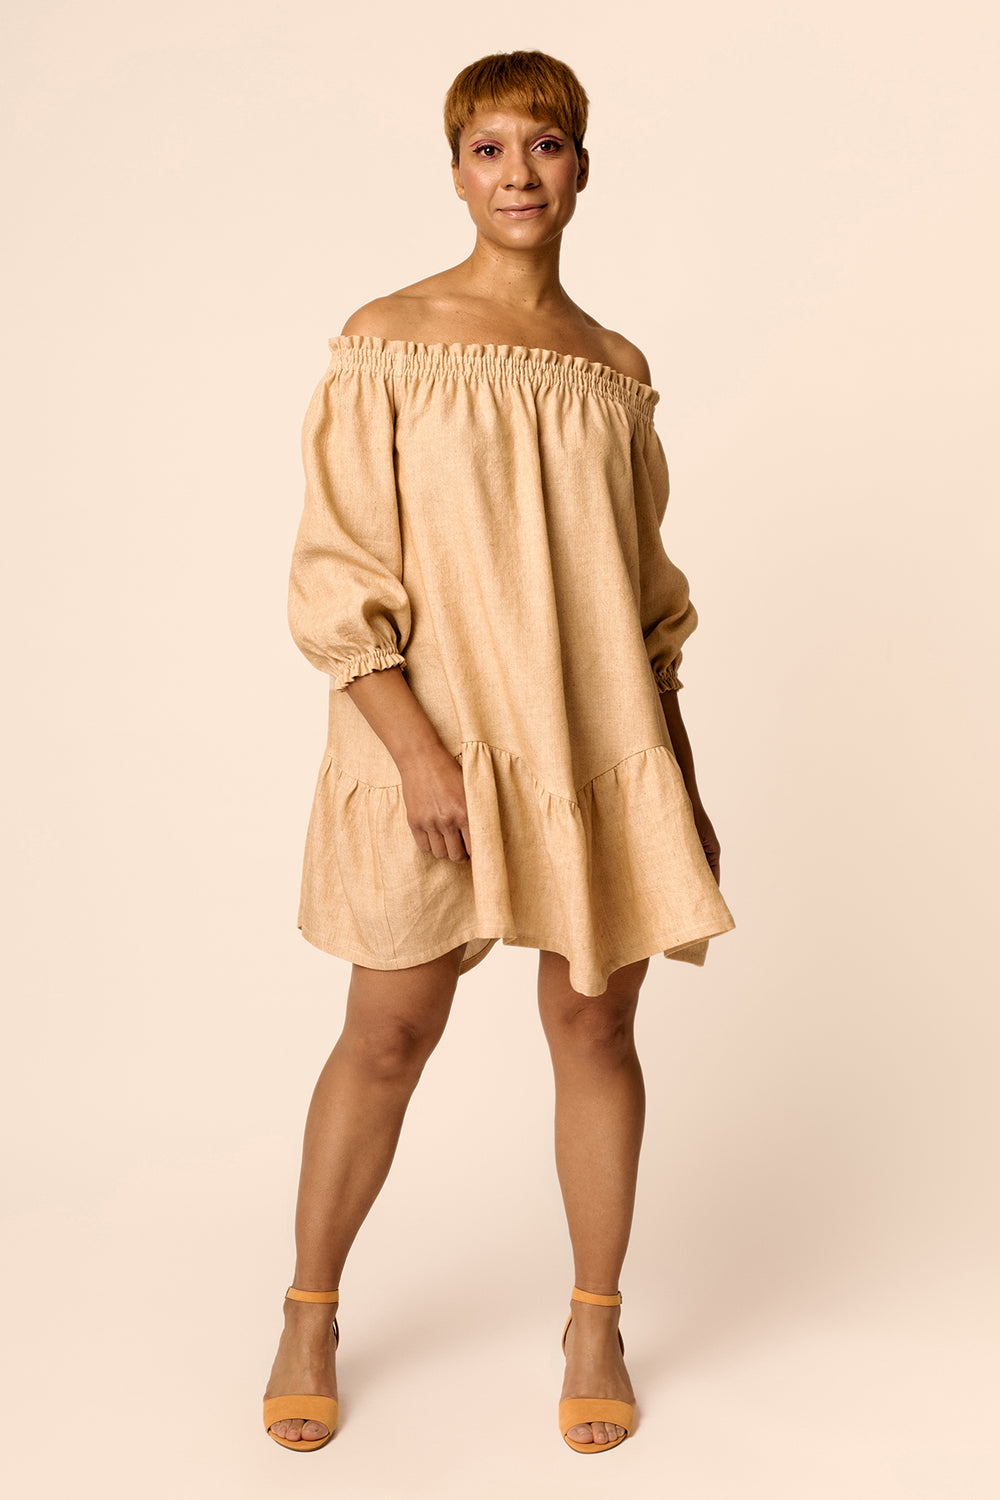 Woman wearing the Ilma Smock Dress sewing pattern from Named on The Fold Line. A dress pattern made in light linen, organic cotton, tencel or rayon fabrics, featuring an off-the-shoulder style, mini length, wavy tiered hemline, elasticated neckline, wrist